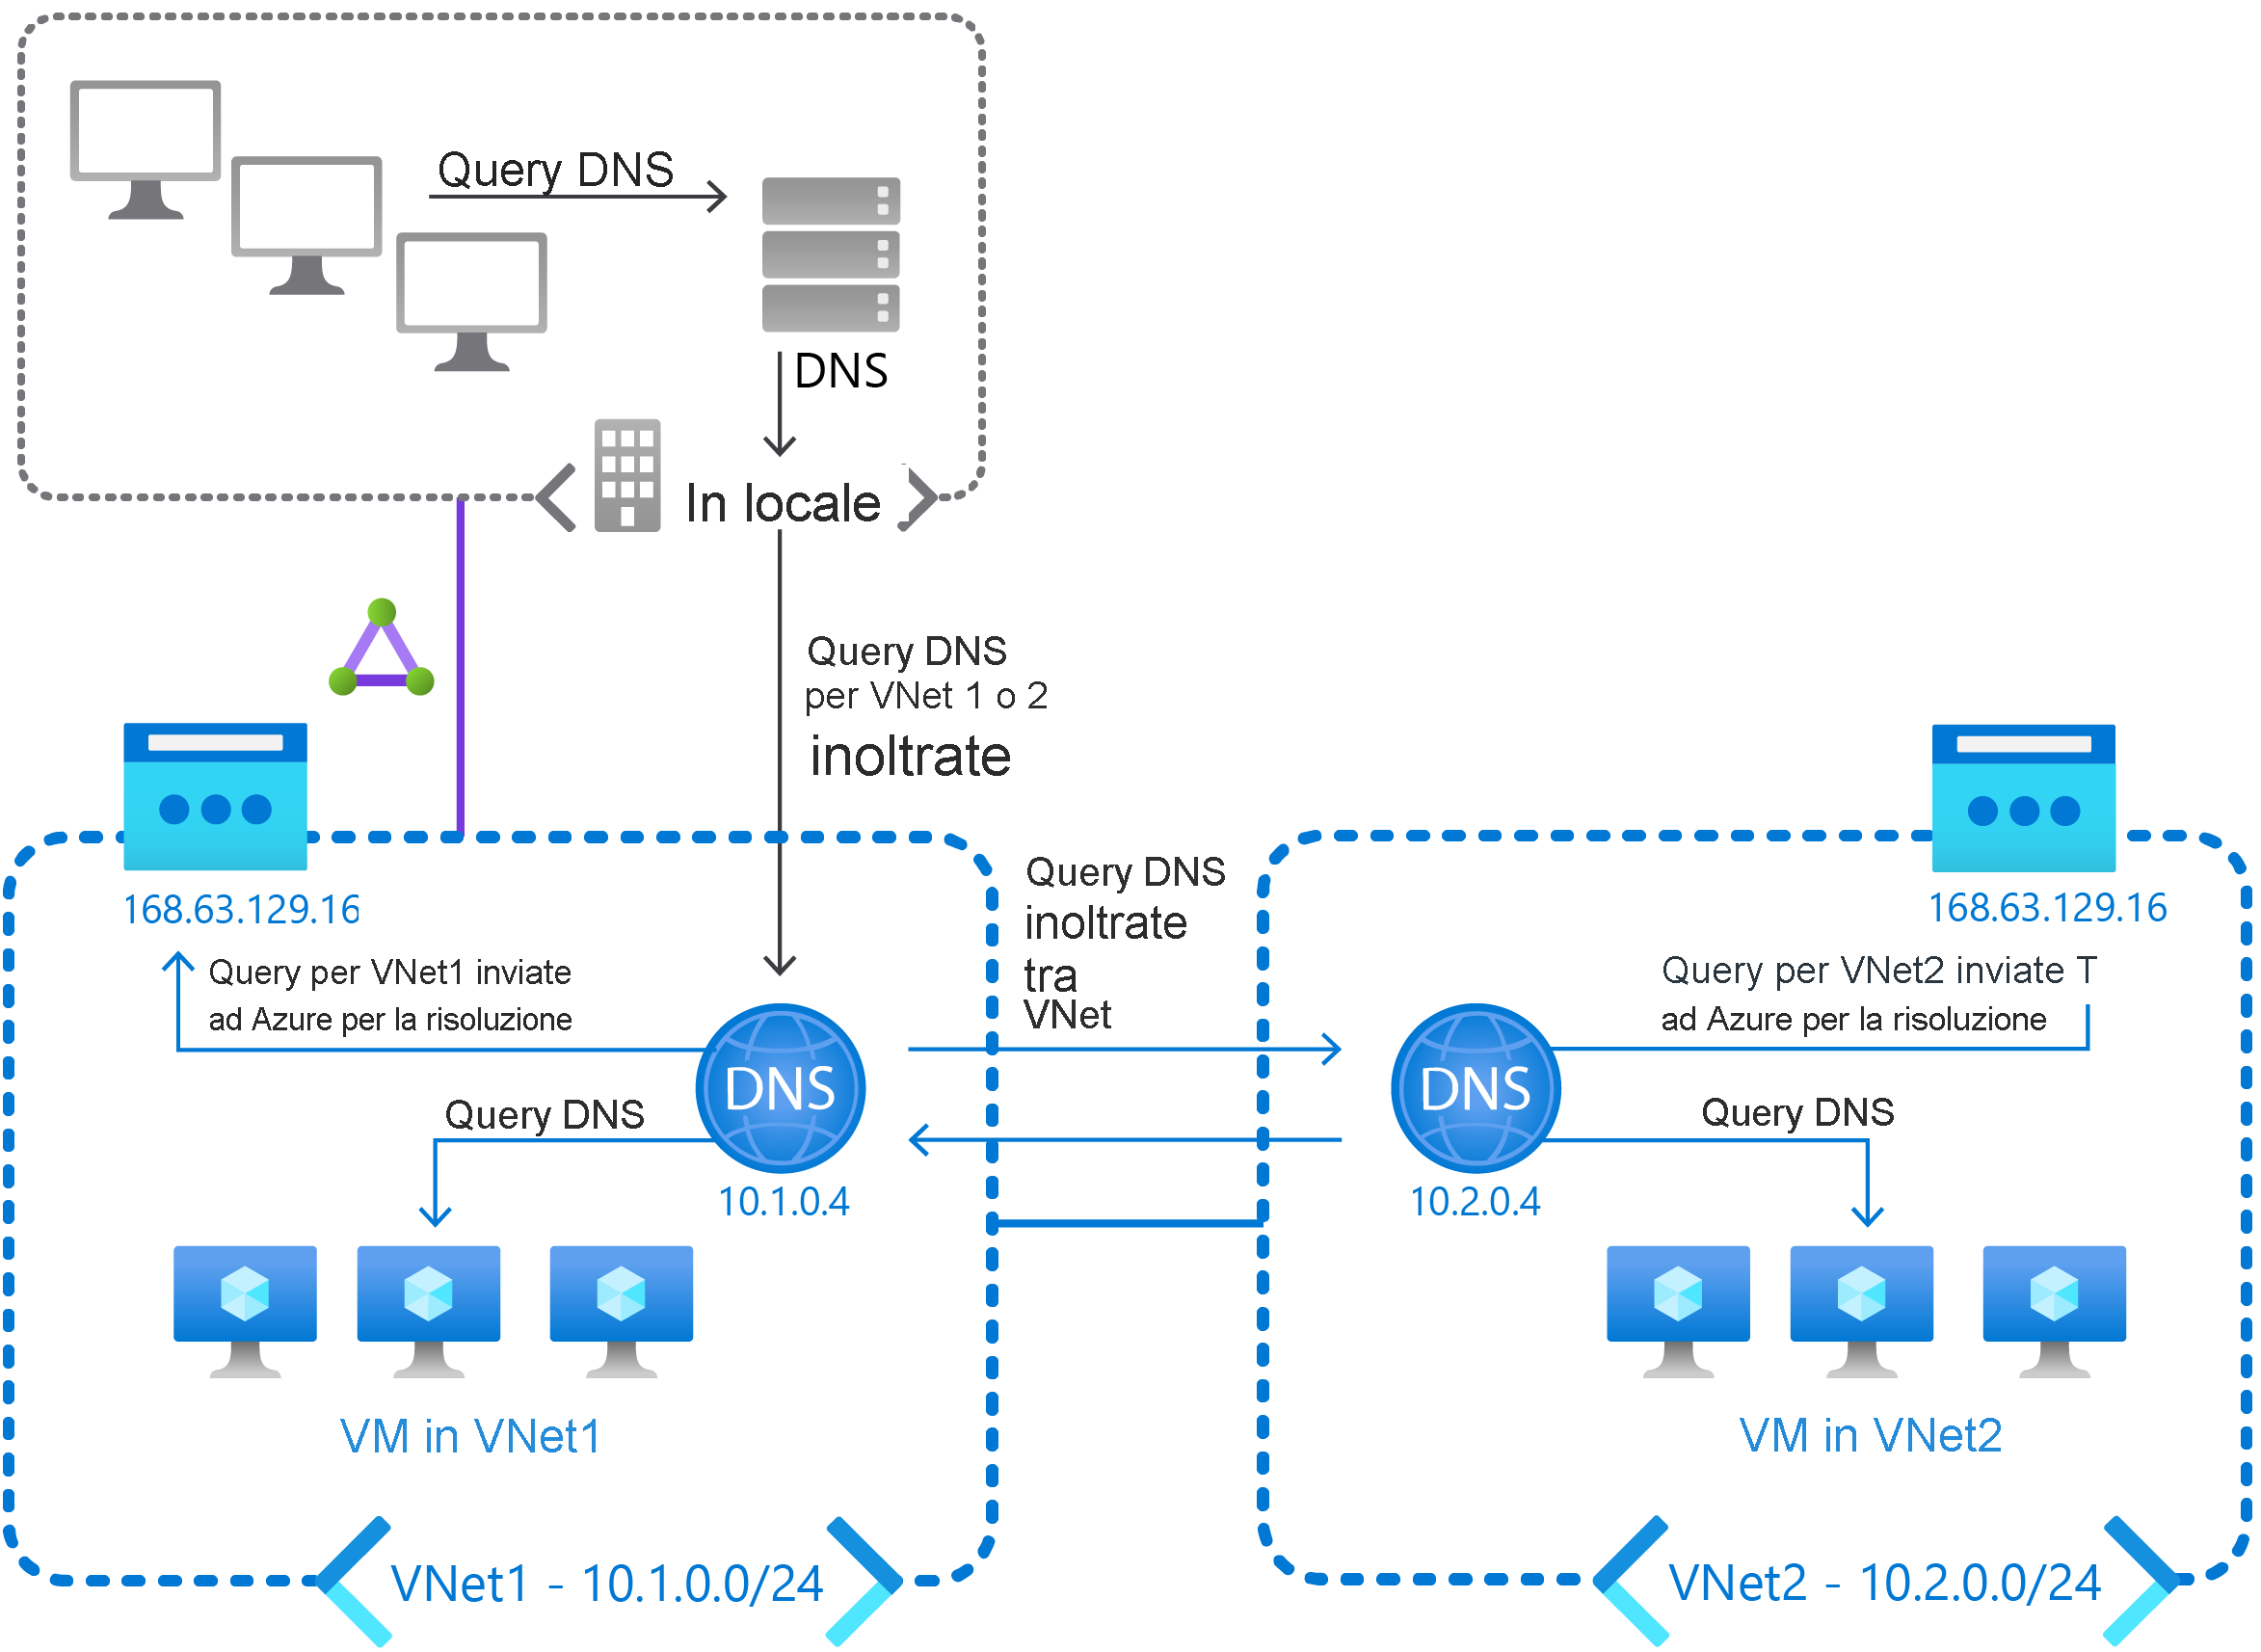 A diagram has an on-premises network and two VNets, each configured with its own DNS server. Queries for VNet1 and VNet2 from on-premises clients are forwarded to these DNS servers. Queries are then forwarded between these two DNS servers, and also to Azure DNS.